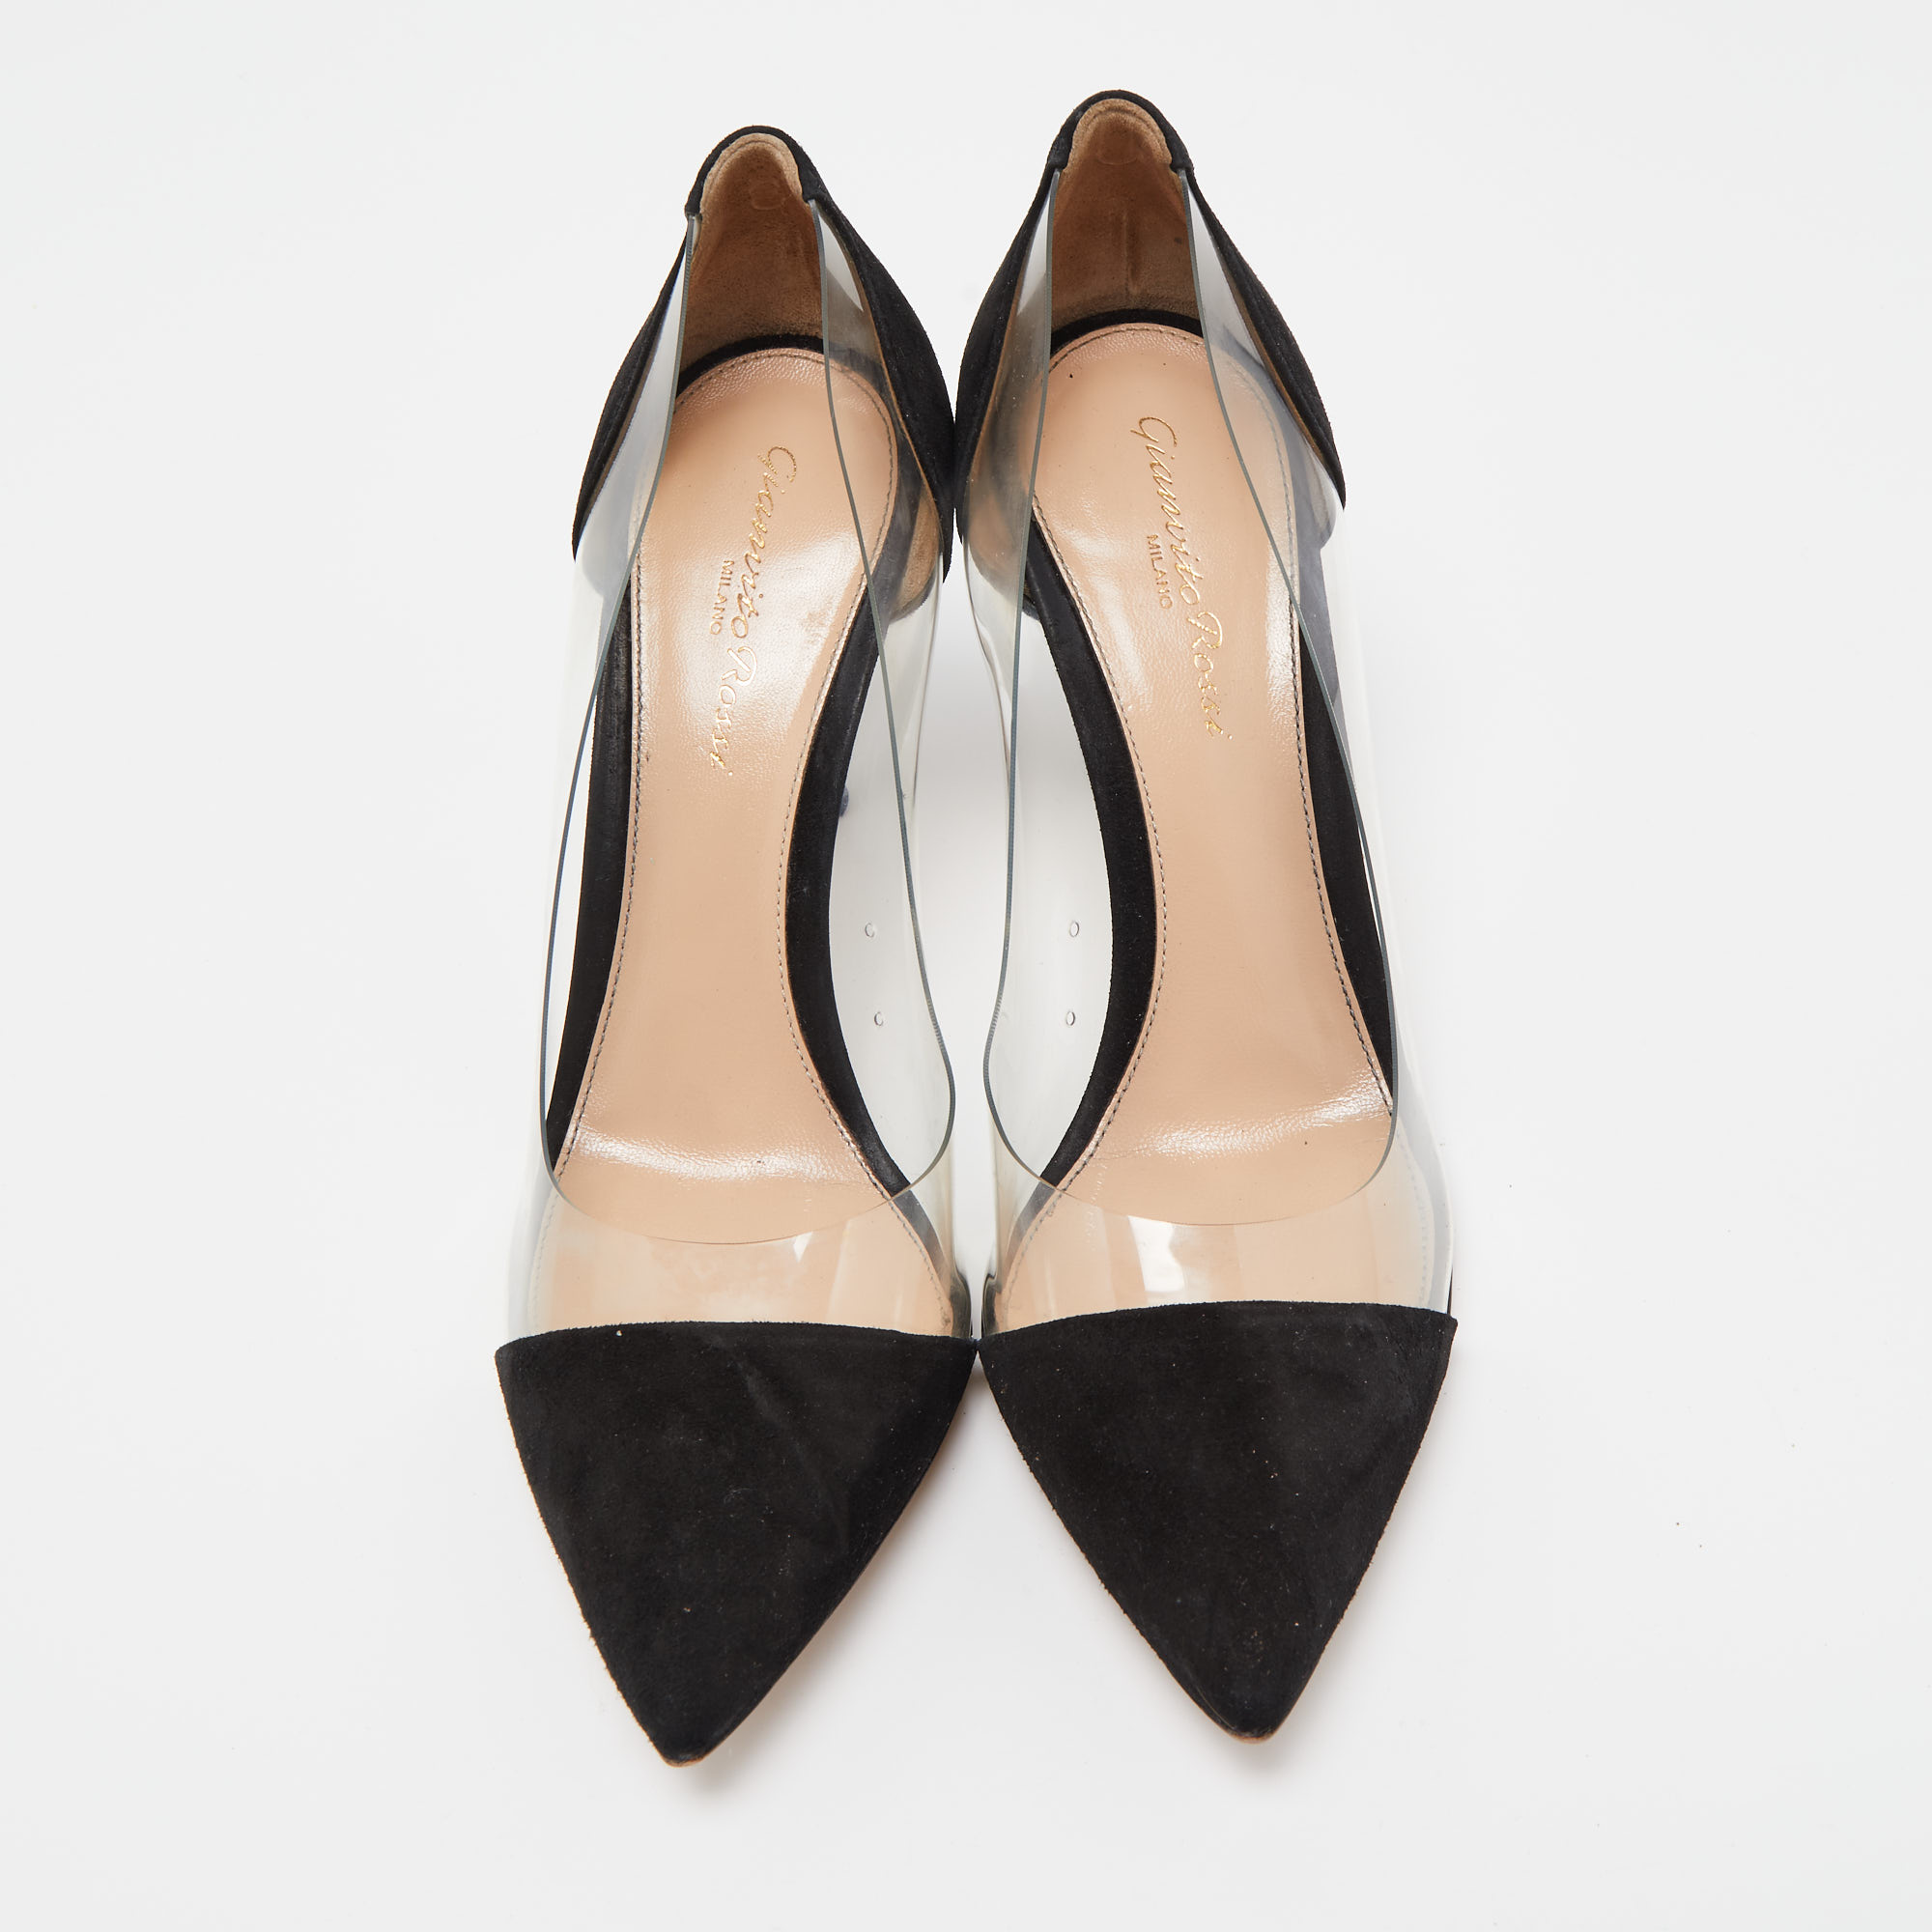 Gianvito Rossi Black Suede And PVC Plexi Pointed Toe Pumps Size 36.5